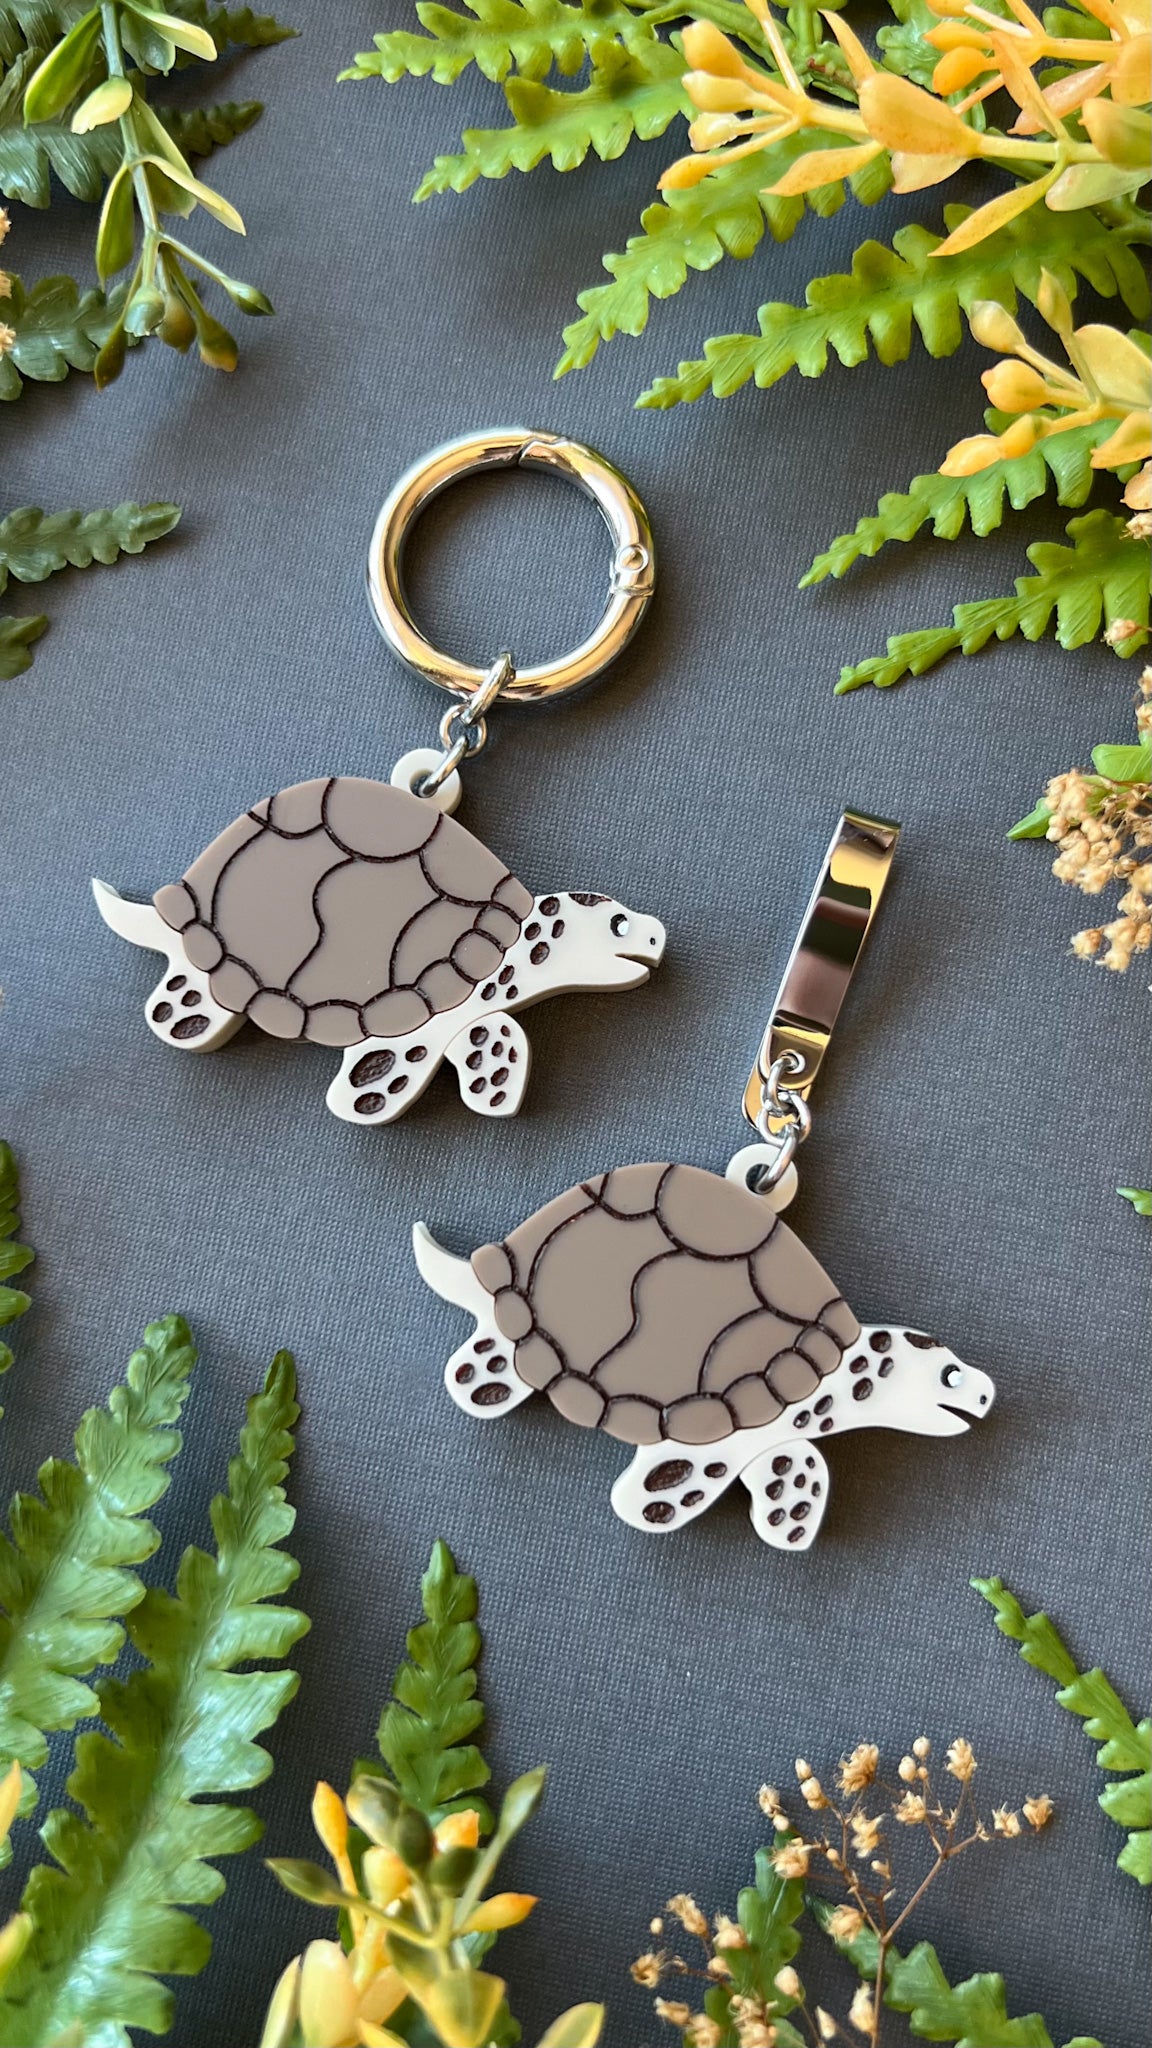 Tortoise Reptile Shoe Accessory | Pull Loop, Shoe Charm, High Top Sneaker or Boot Clip, Shoe or Bag Keychain